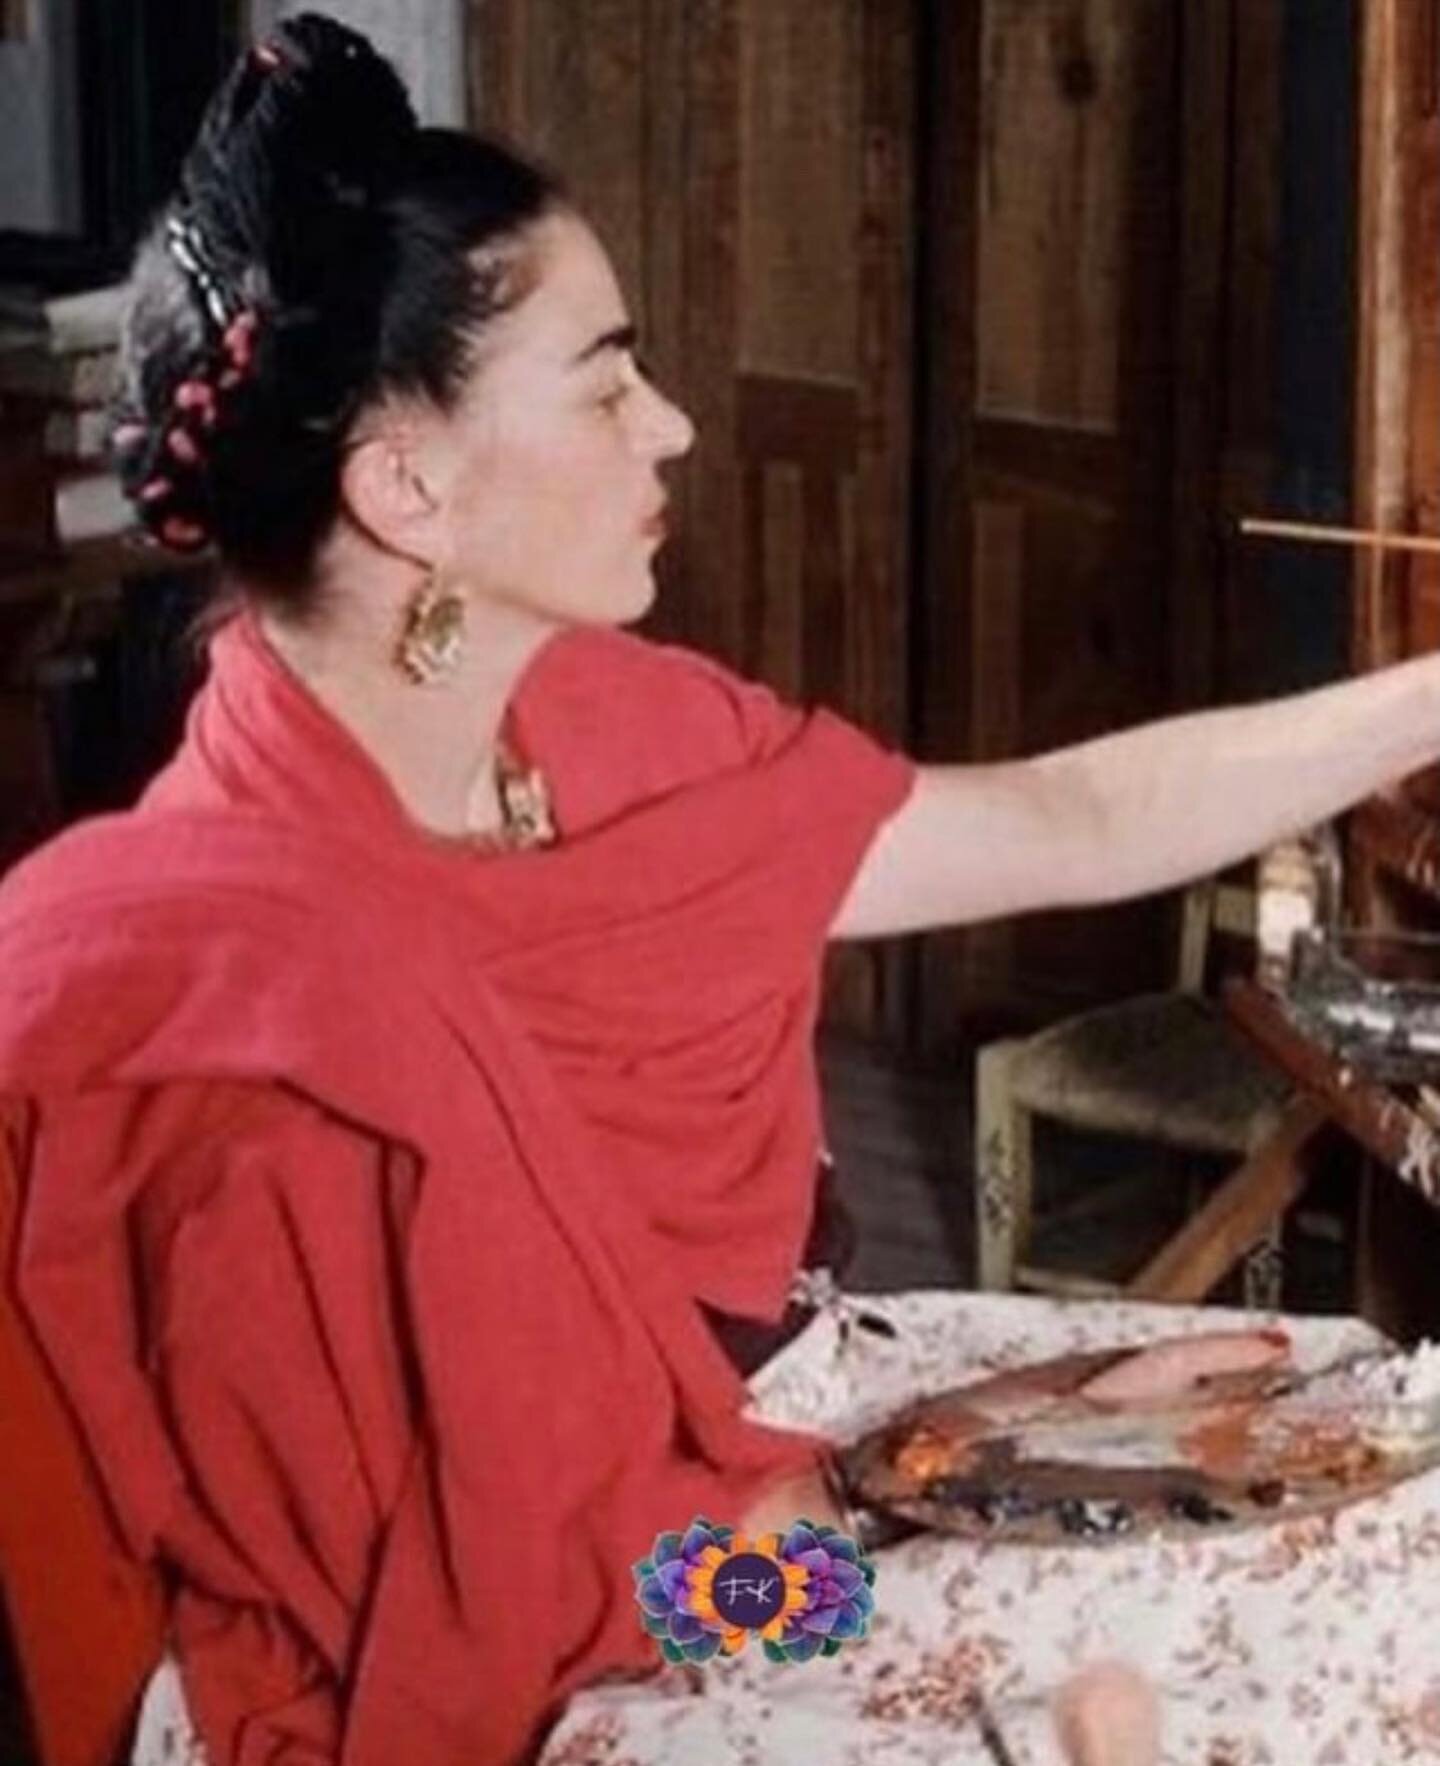 ART HERSTORY /❋ / Honoring the inspiring Frida Kahlo in #DisabilityPrideMonth via  @feminist 

&lsquo;Most of the world recognizes the work of renowned artist Frida Kahlo, but some may not know of the physical disabilities she lived with throughout h